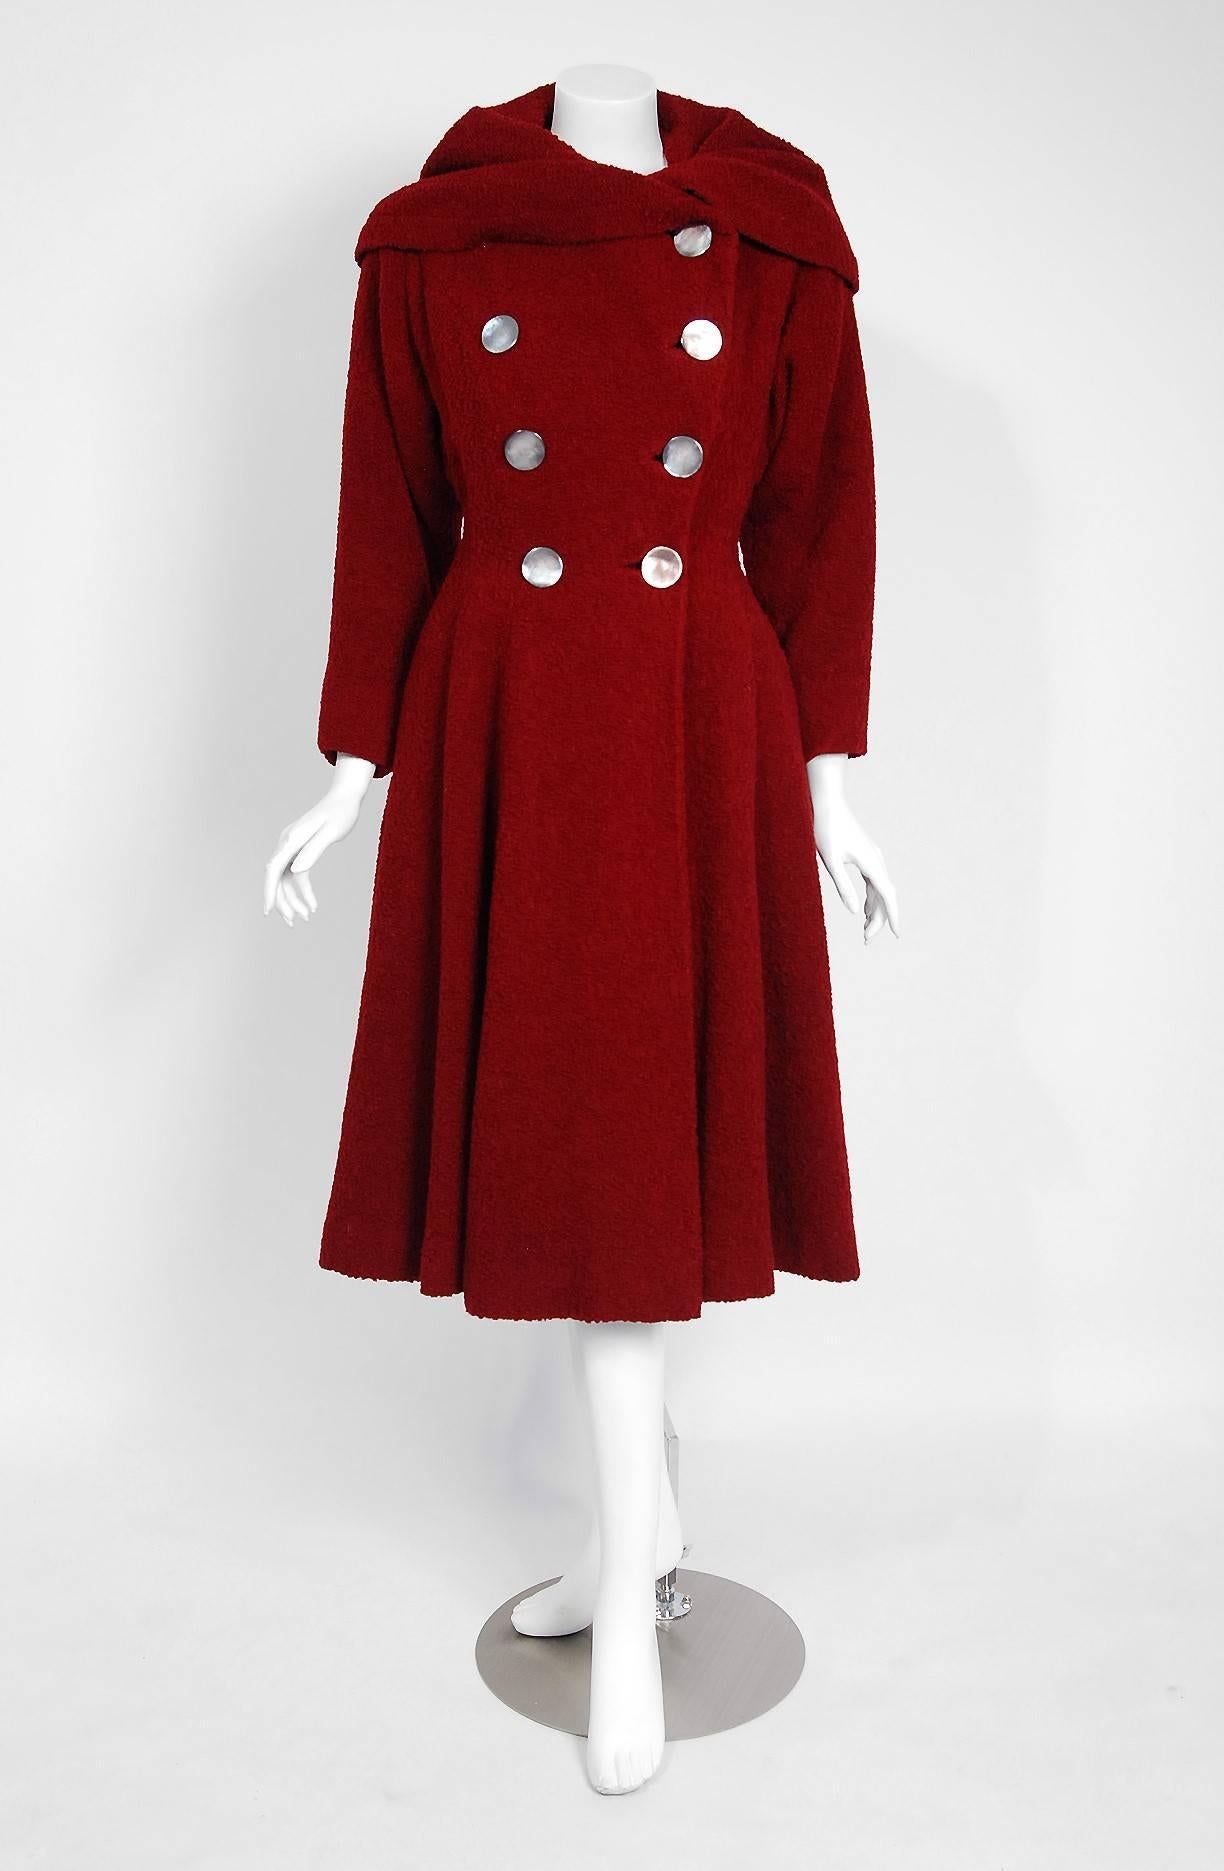 Stunning 1940's couture level coat in the most fabulous burgundy red chenille wool. I love the dramatic velvet-backed wide shawl collar and double breasted design. I adore those large pearlized buttons. Shaped with princess-line seams that flare out